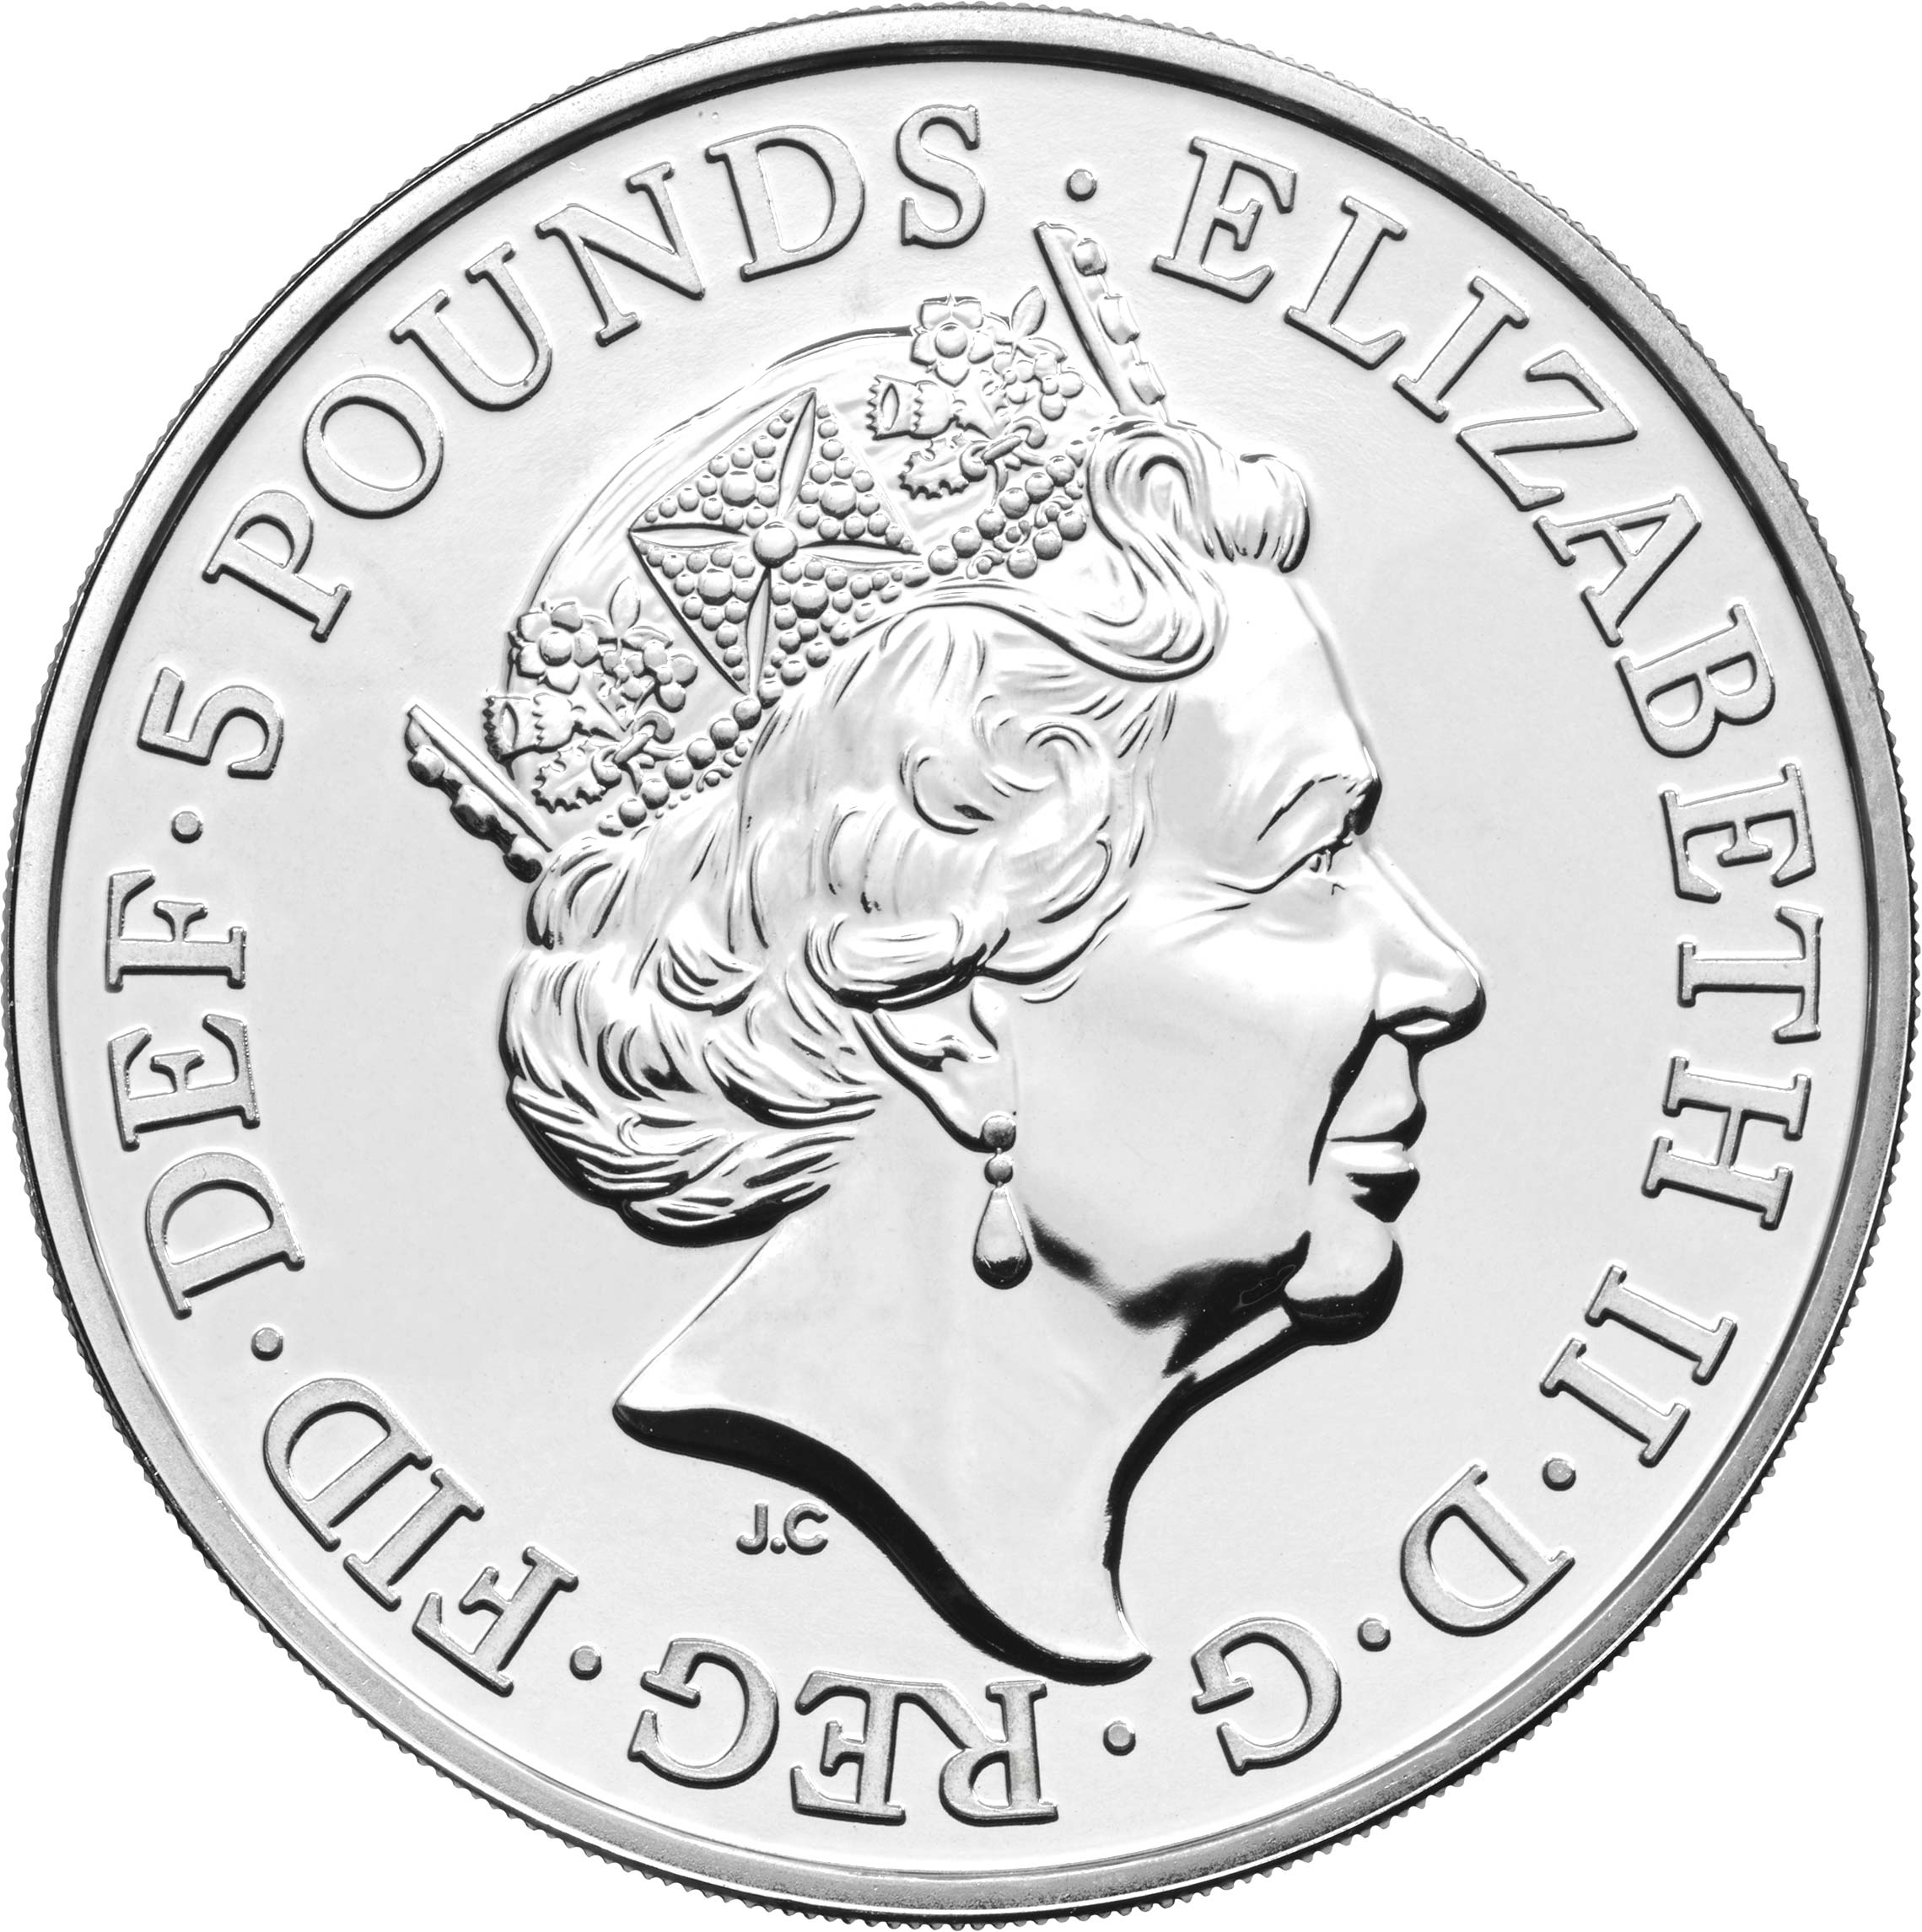 How Much Are 5-Pound Coins Worth? - Reference.com